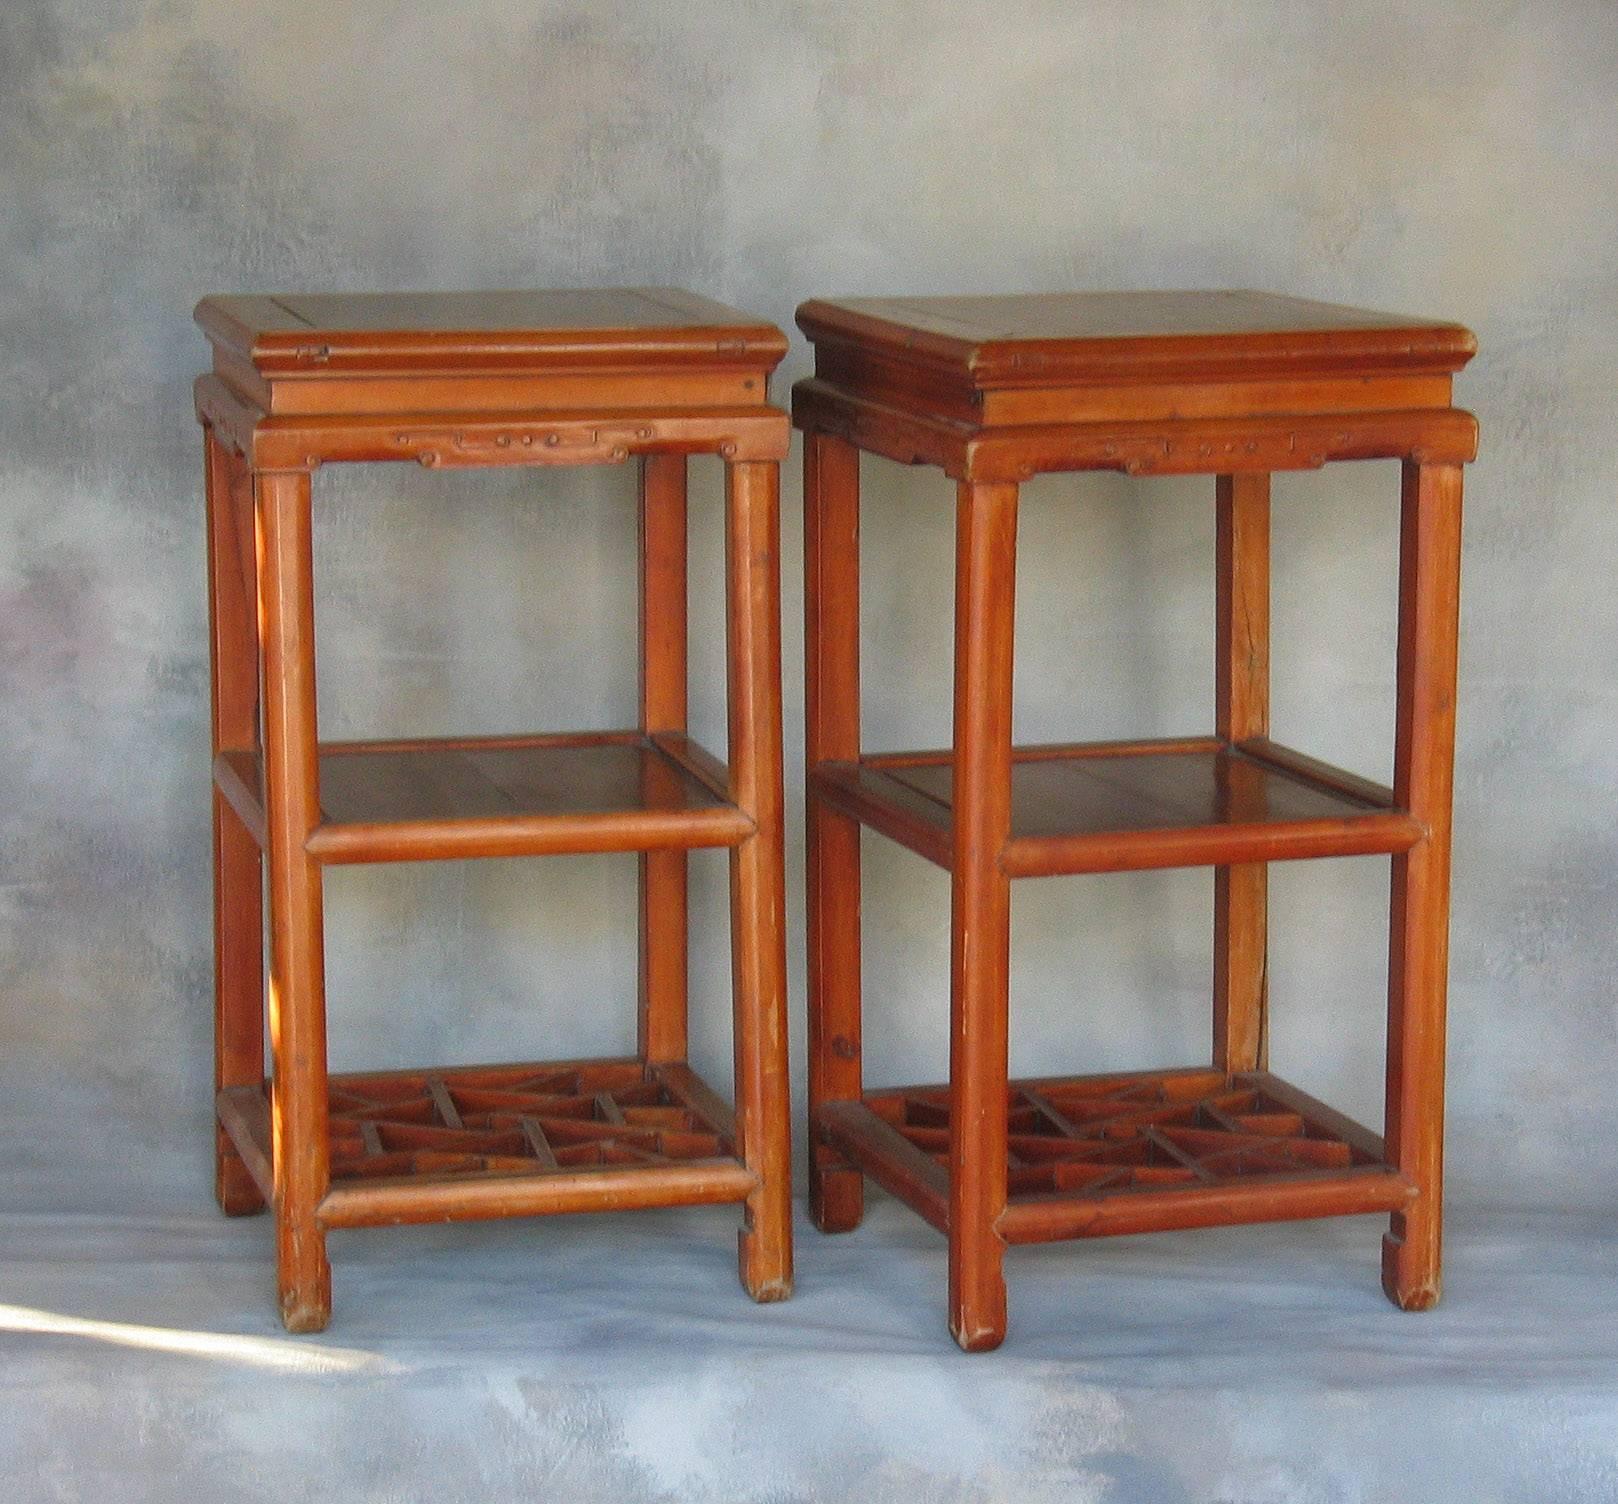 Late Qing Dynasty Carved Hardwood Side Tables or Stands Southern Chinese In Good Condition For Sale In Ottawa, Ontario